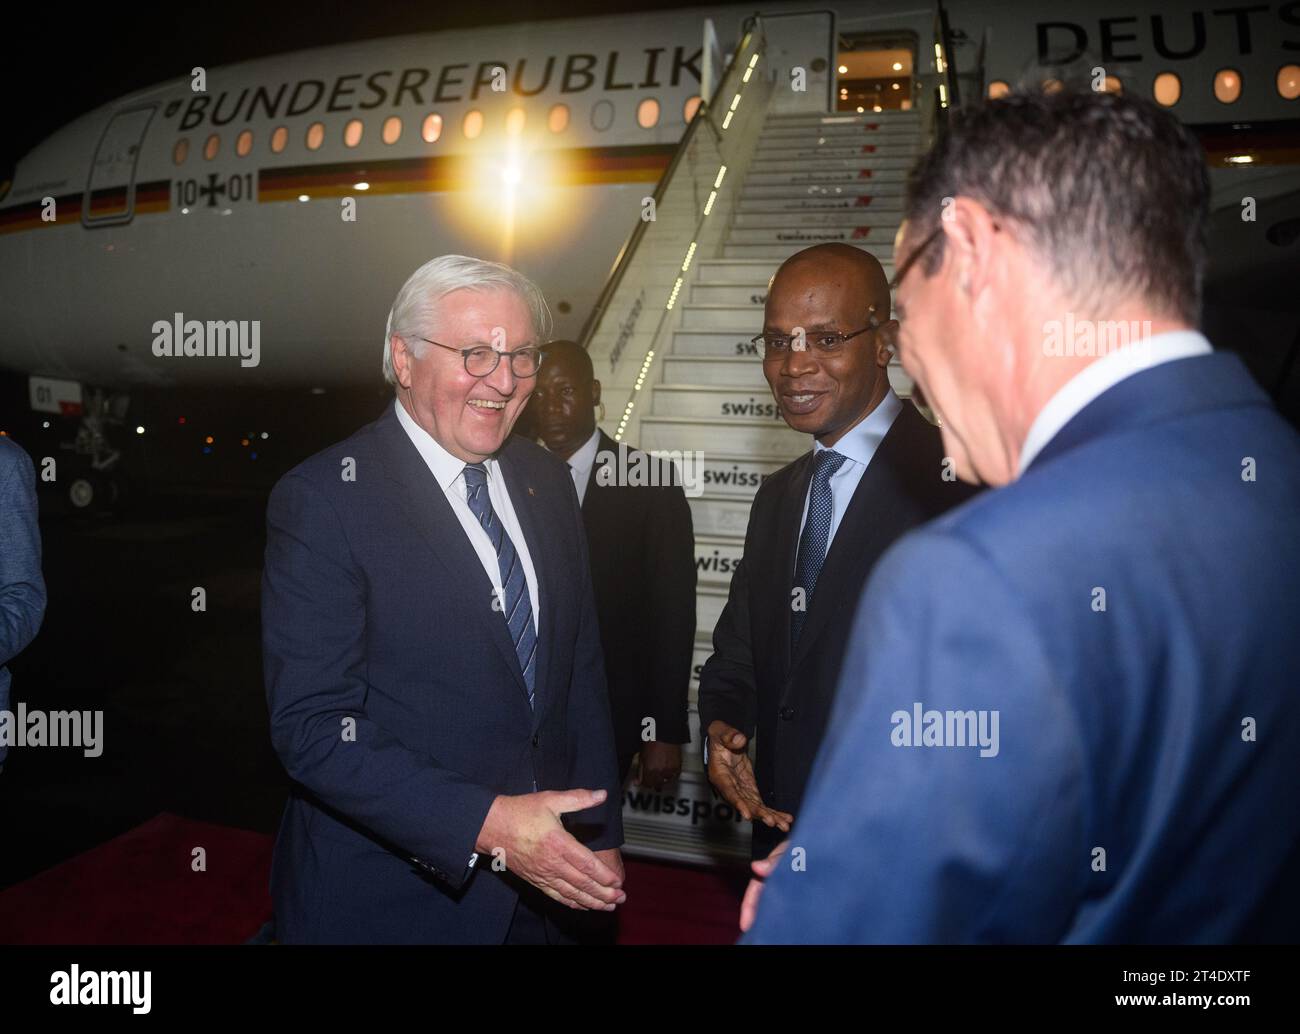 Daressalam, Tanzania. 30th Oct, 2023. German President Frank-Walter Steinmeier (l) is welcomed at Julius Nyerere International Airport in Dar es Salaam by January Makamba (m), Foreign Minister of Tanzania, and Thomas Terstegen, Ambassador of the Federal Republic of Germany to Tanzania. President Steinmeier is visiting the East African countries of Tanzania and Zambia this week. Credit: Bernd von Jutrczenka/dpa/Alamy Live News Stock Photo